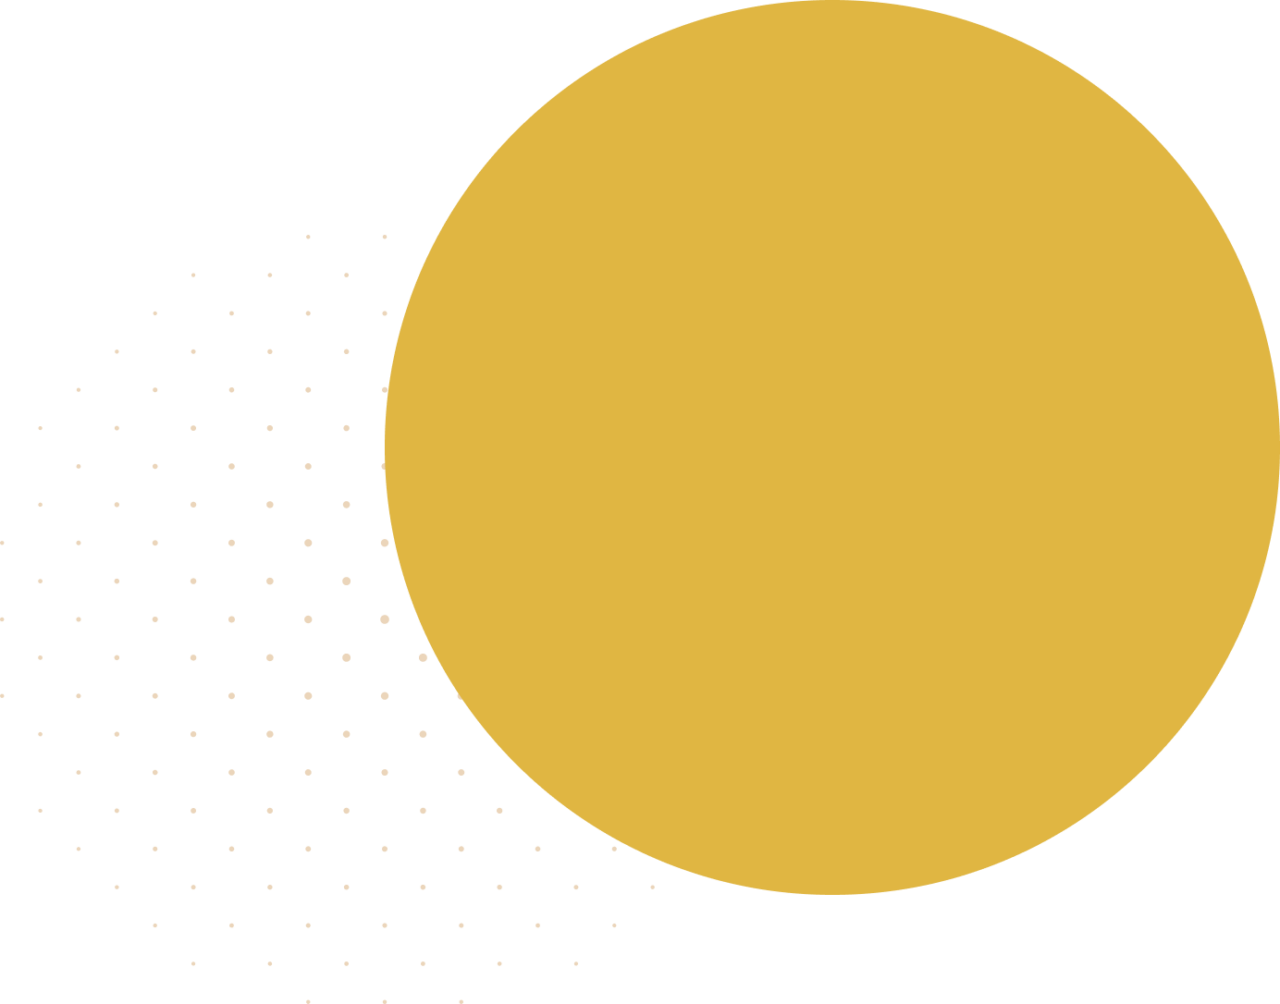 A large golden circle on the left with small white dots against a black background, representing stars in space.